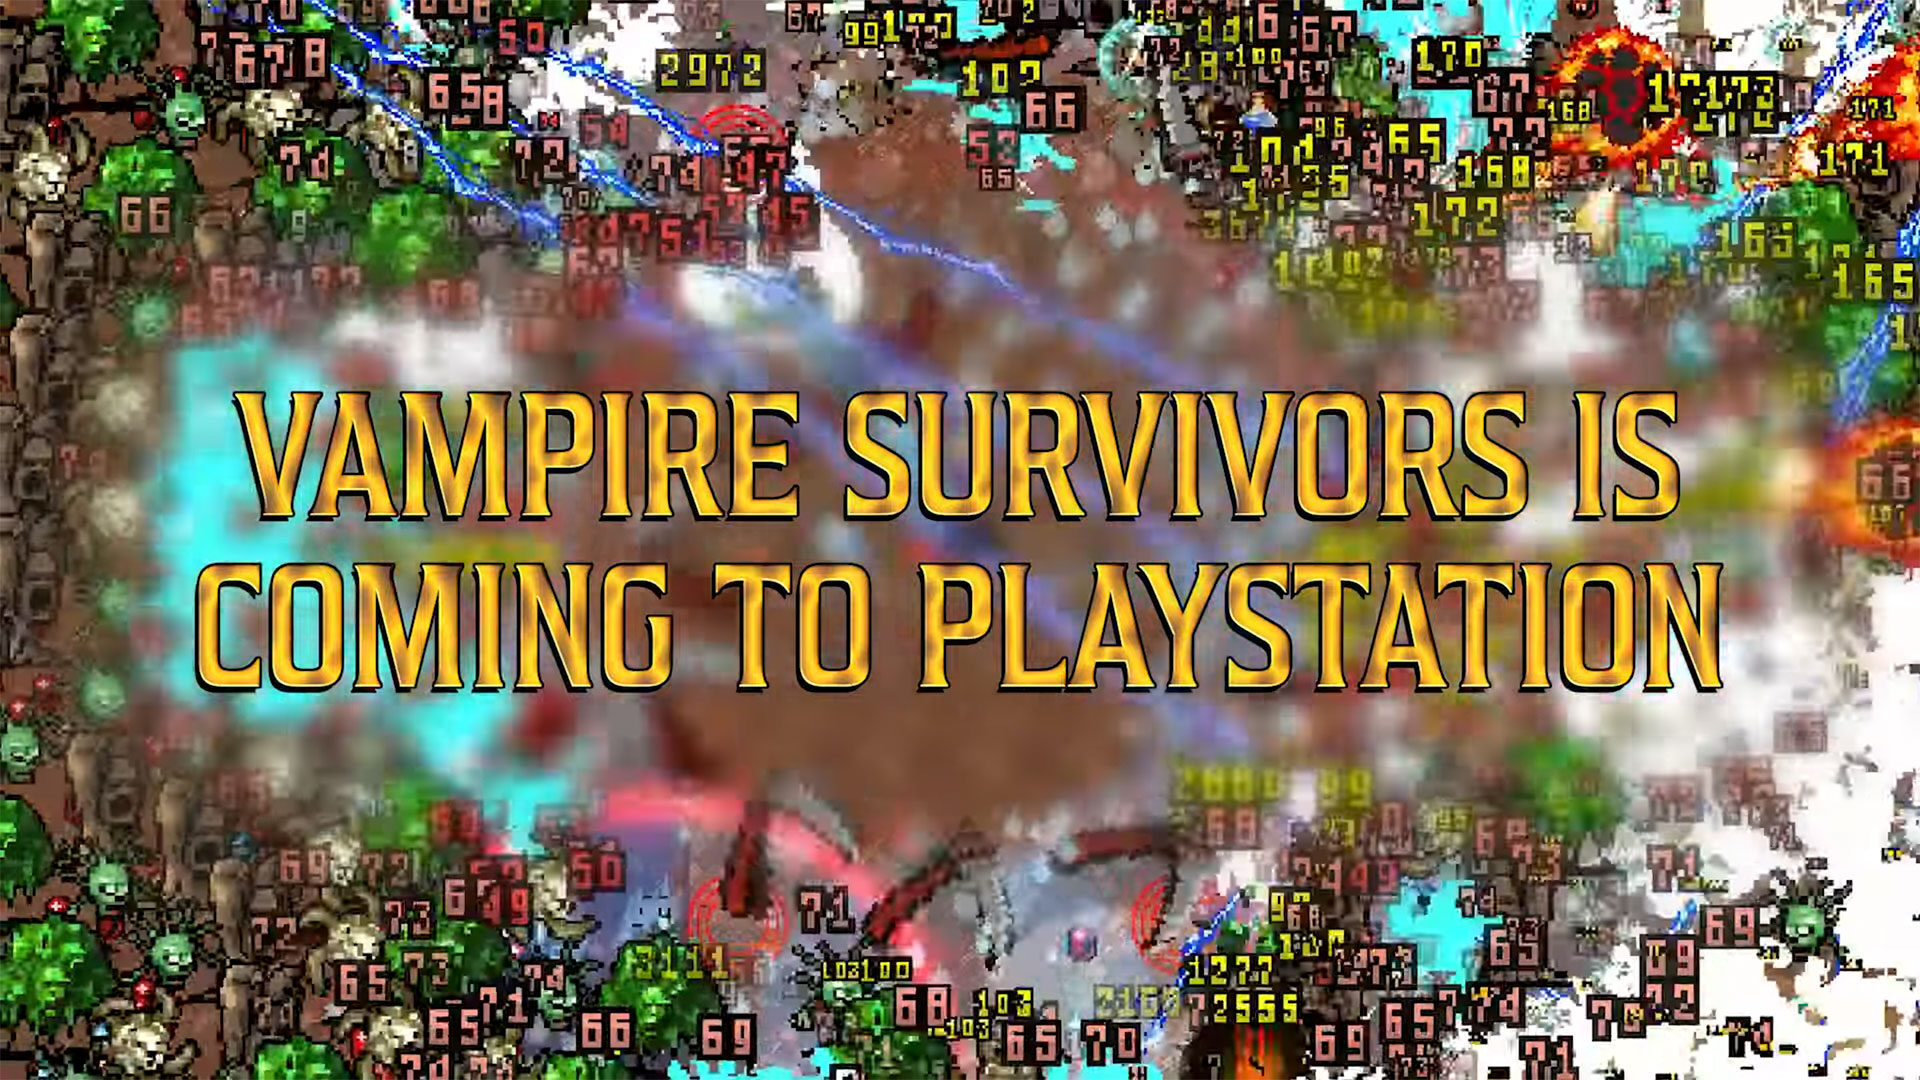 Vampire Survivors launches on PlayStation this summer